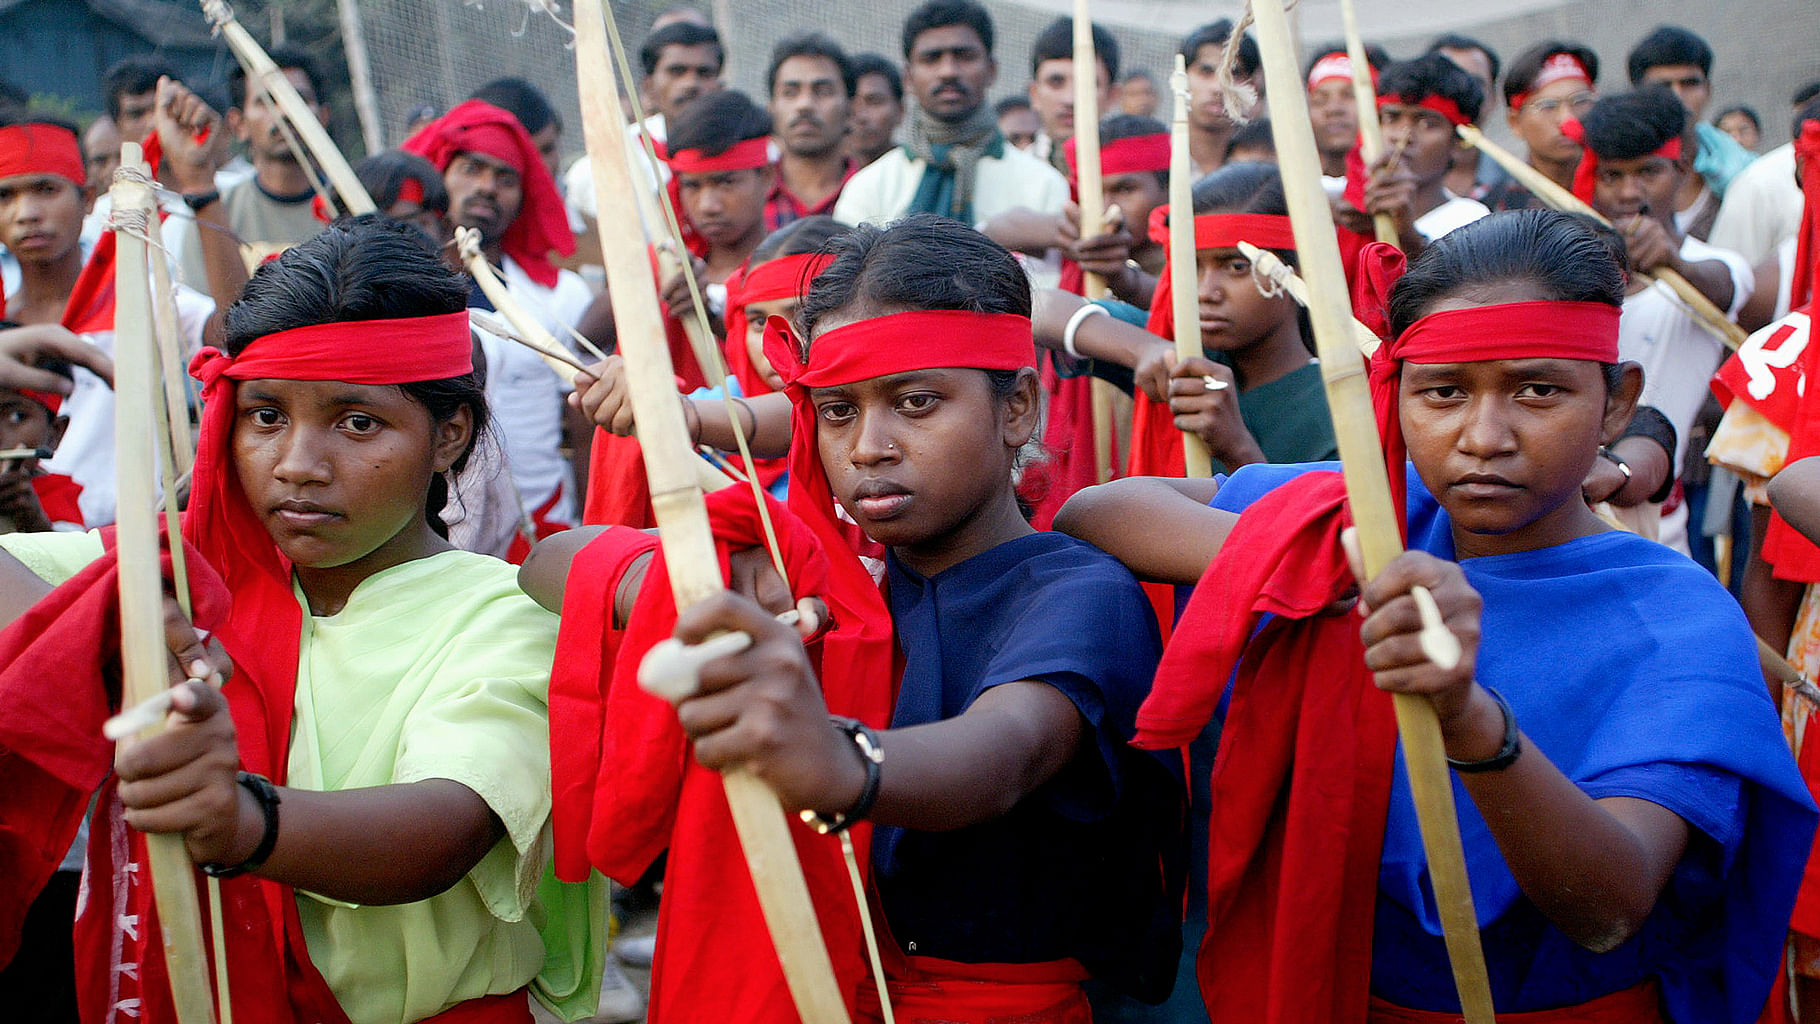 File photos of Naxalites posing with bows and arrows during a rally. (Photo: Reuters)